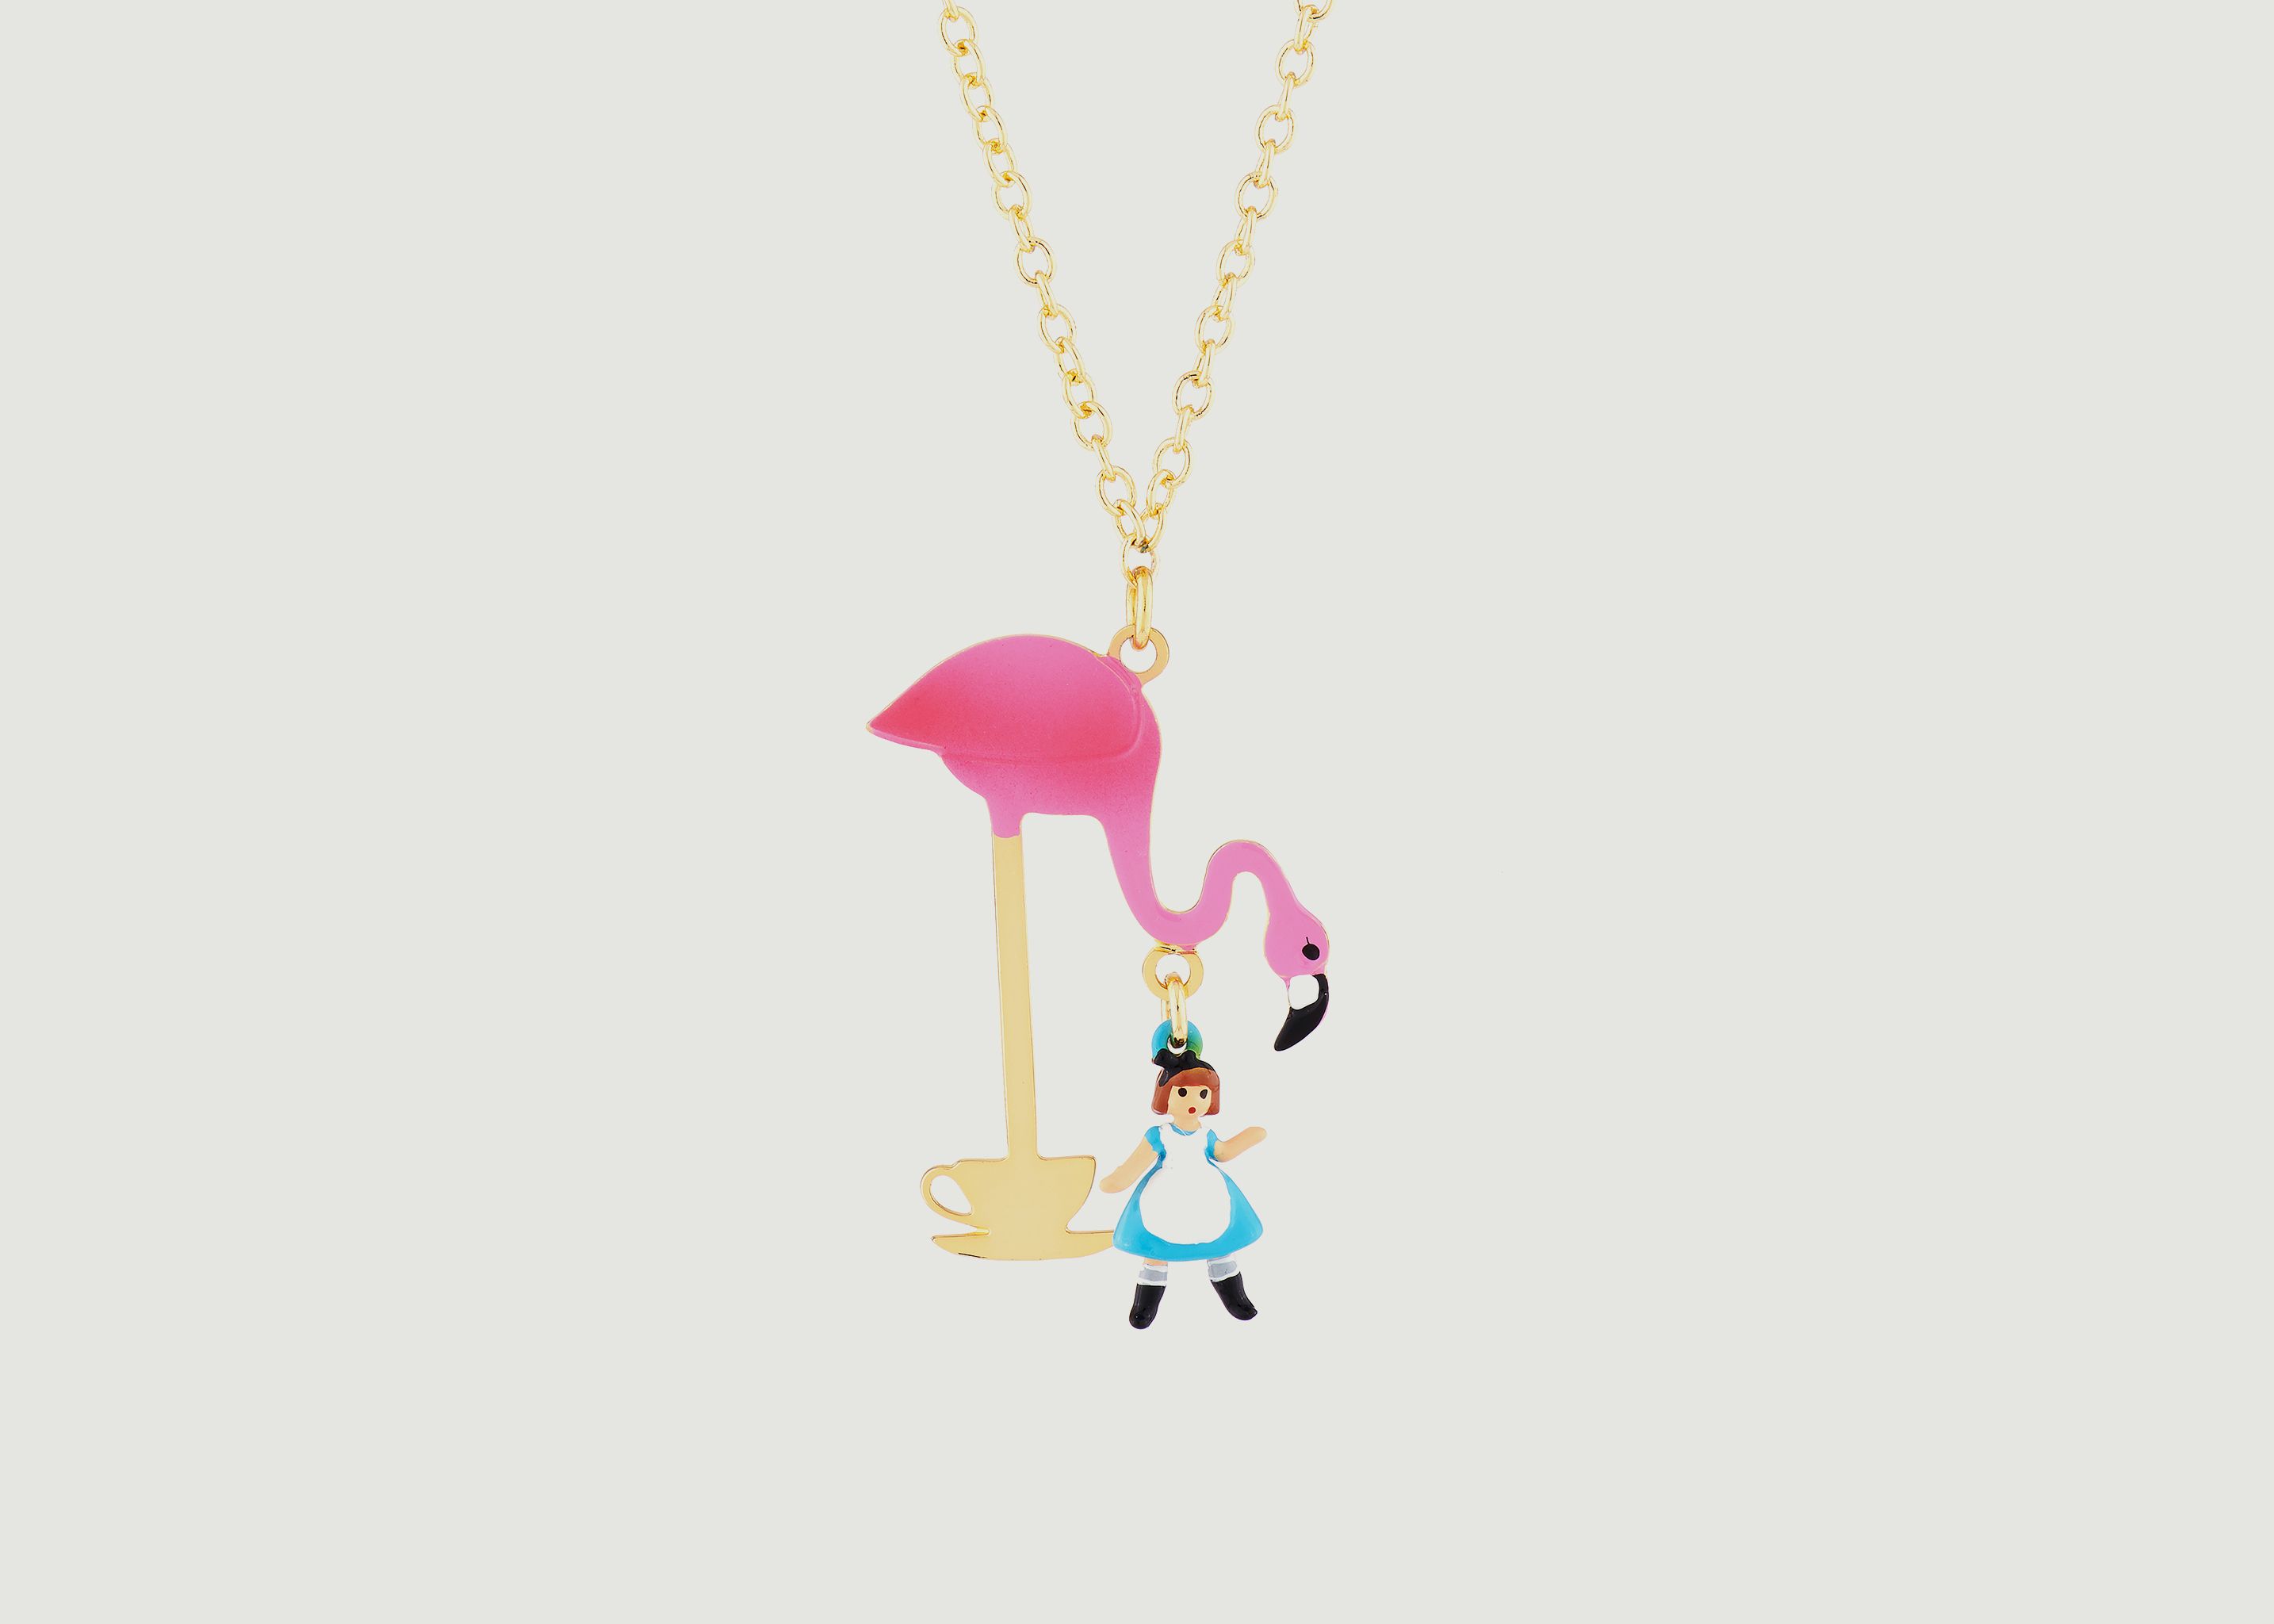 Teatime Alice Et Flamant Rose necklace with pendant - N2